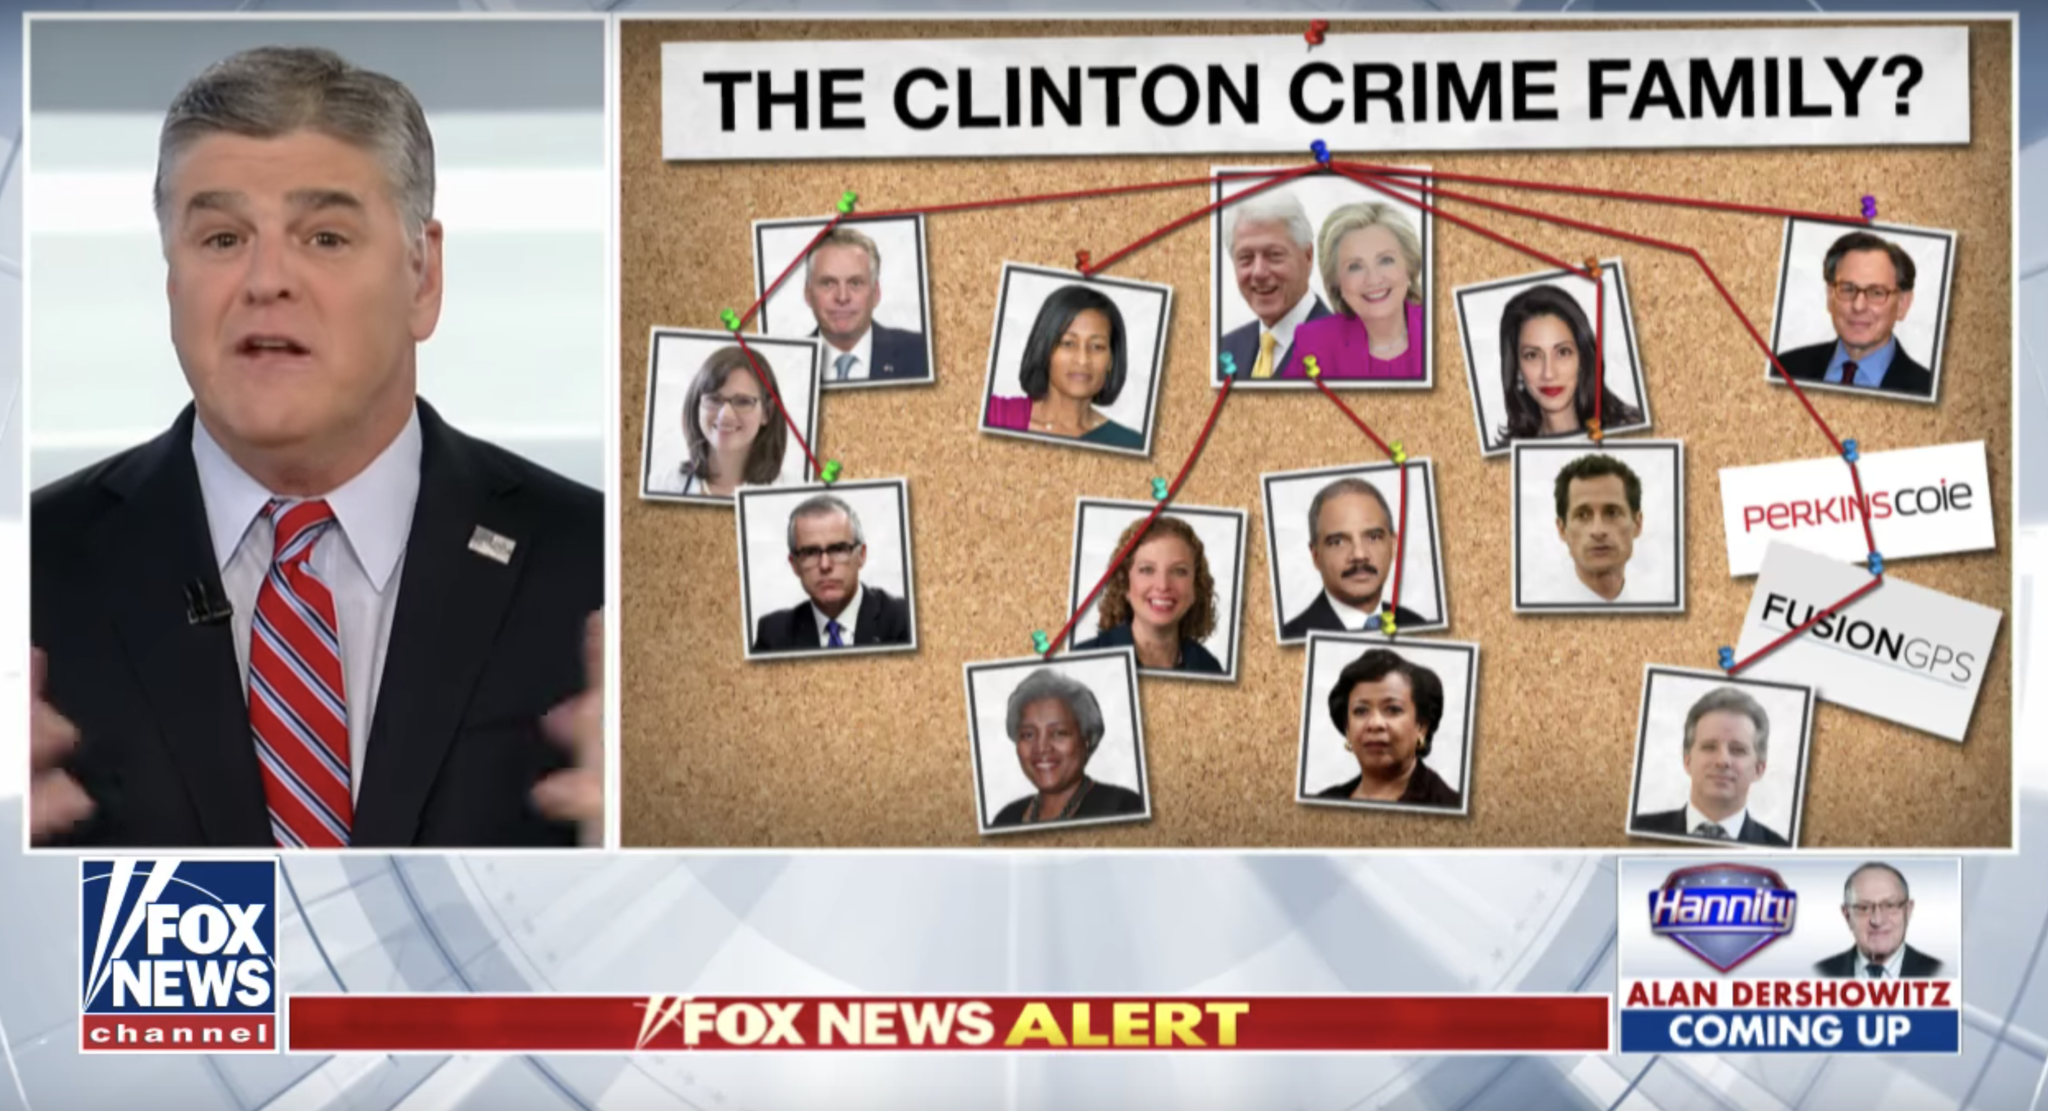 Trump touts Hannity's show on 'Deep State crime families' led by Mueller, Comey and ...2048 x 1111